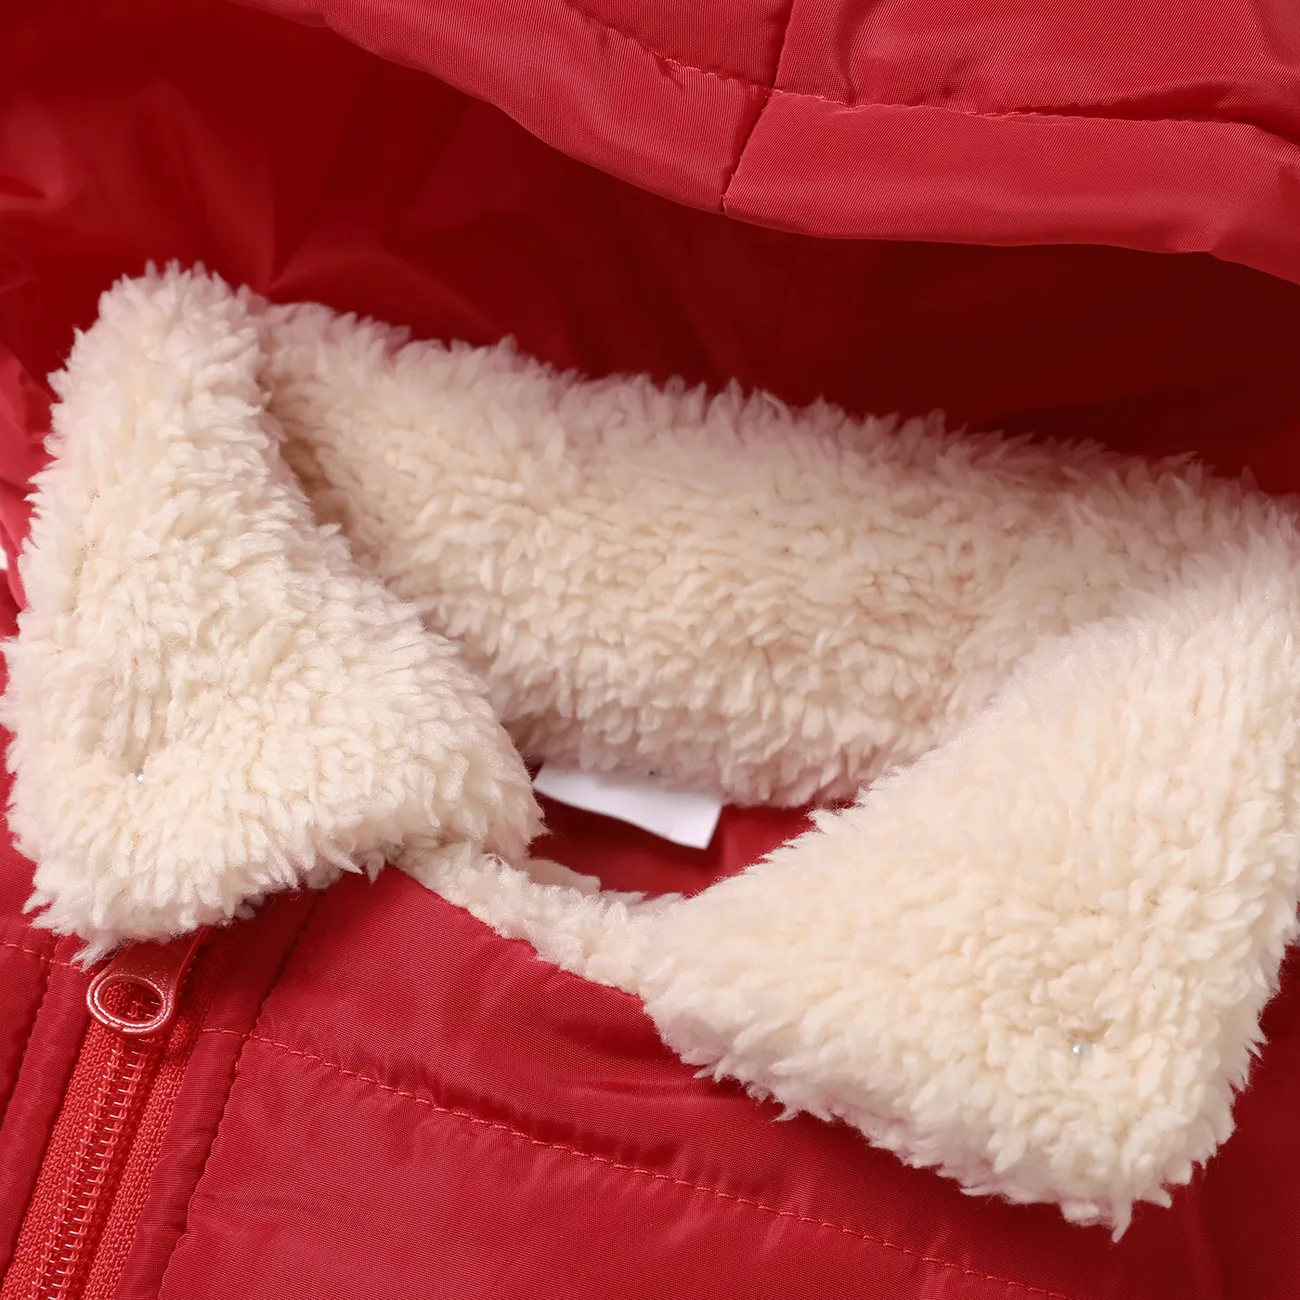 Baby Boy/Girl Thickened Thermal Fleece Lined Long-sleeve Quilted Winter Coat Red big image 1